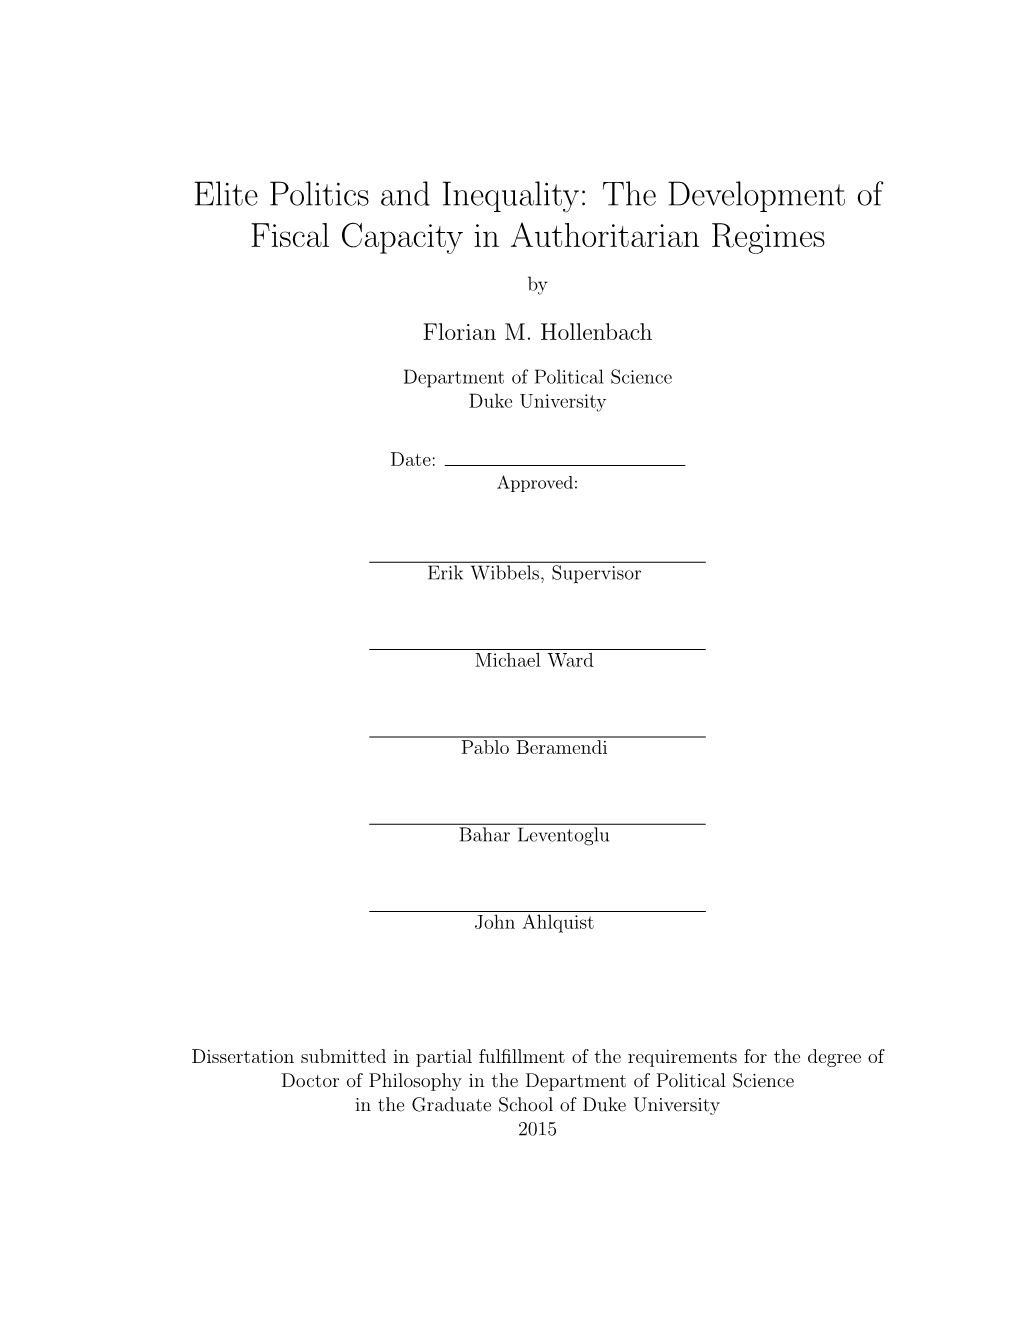 The Development of Fiscal Capacity in Authoritarian Regimes